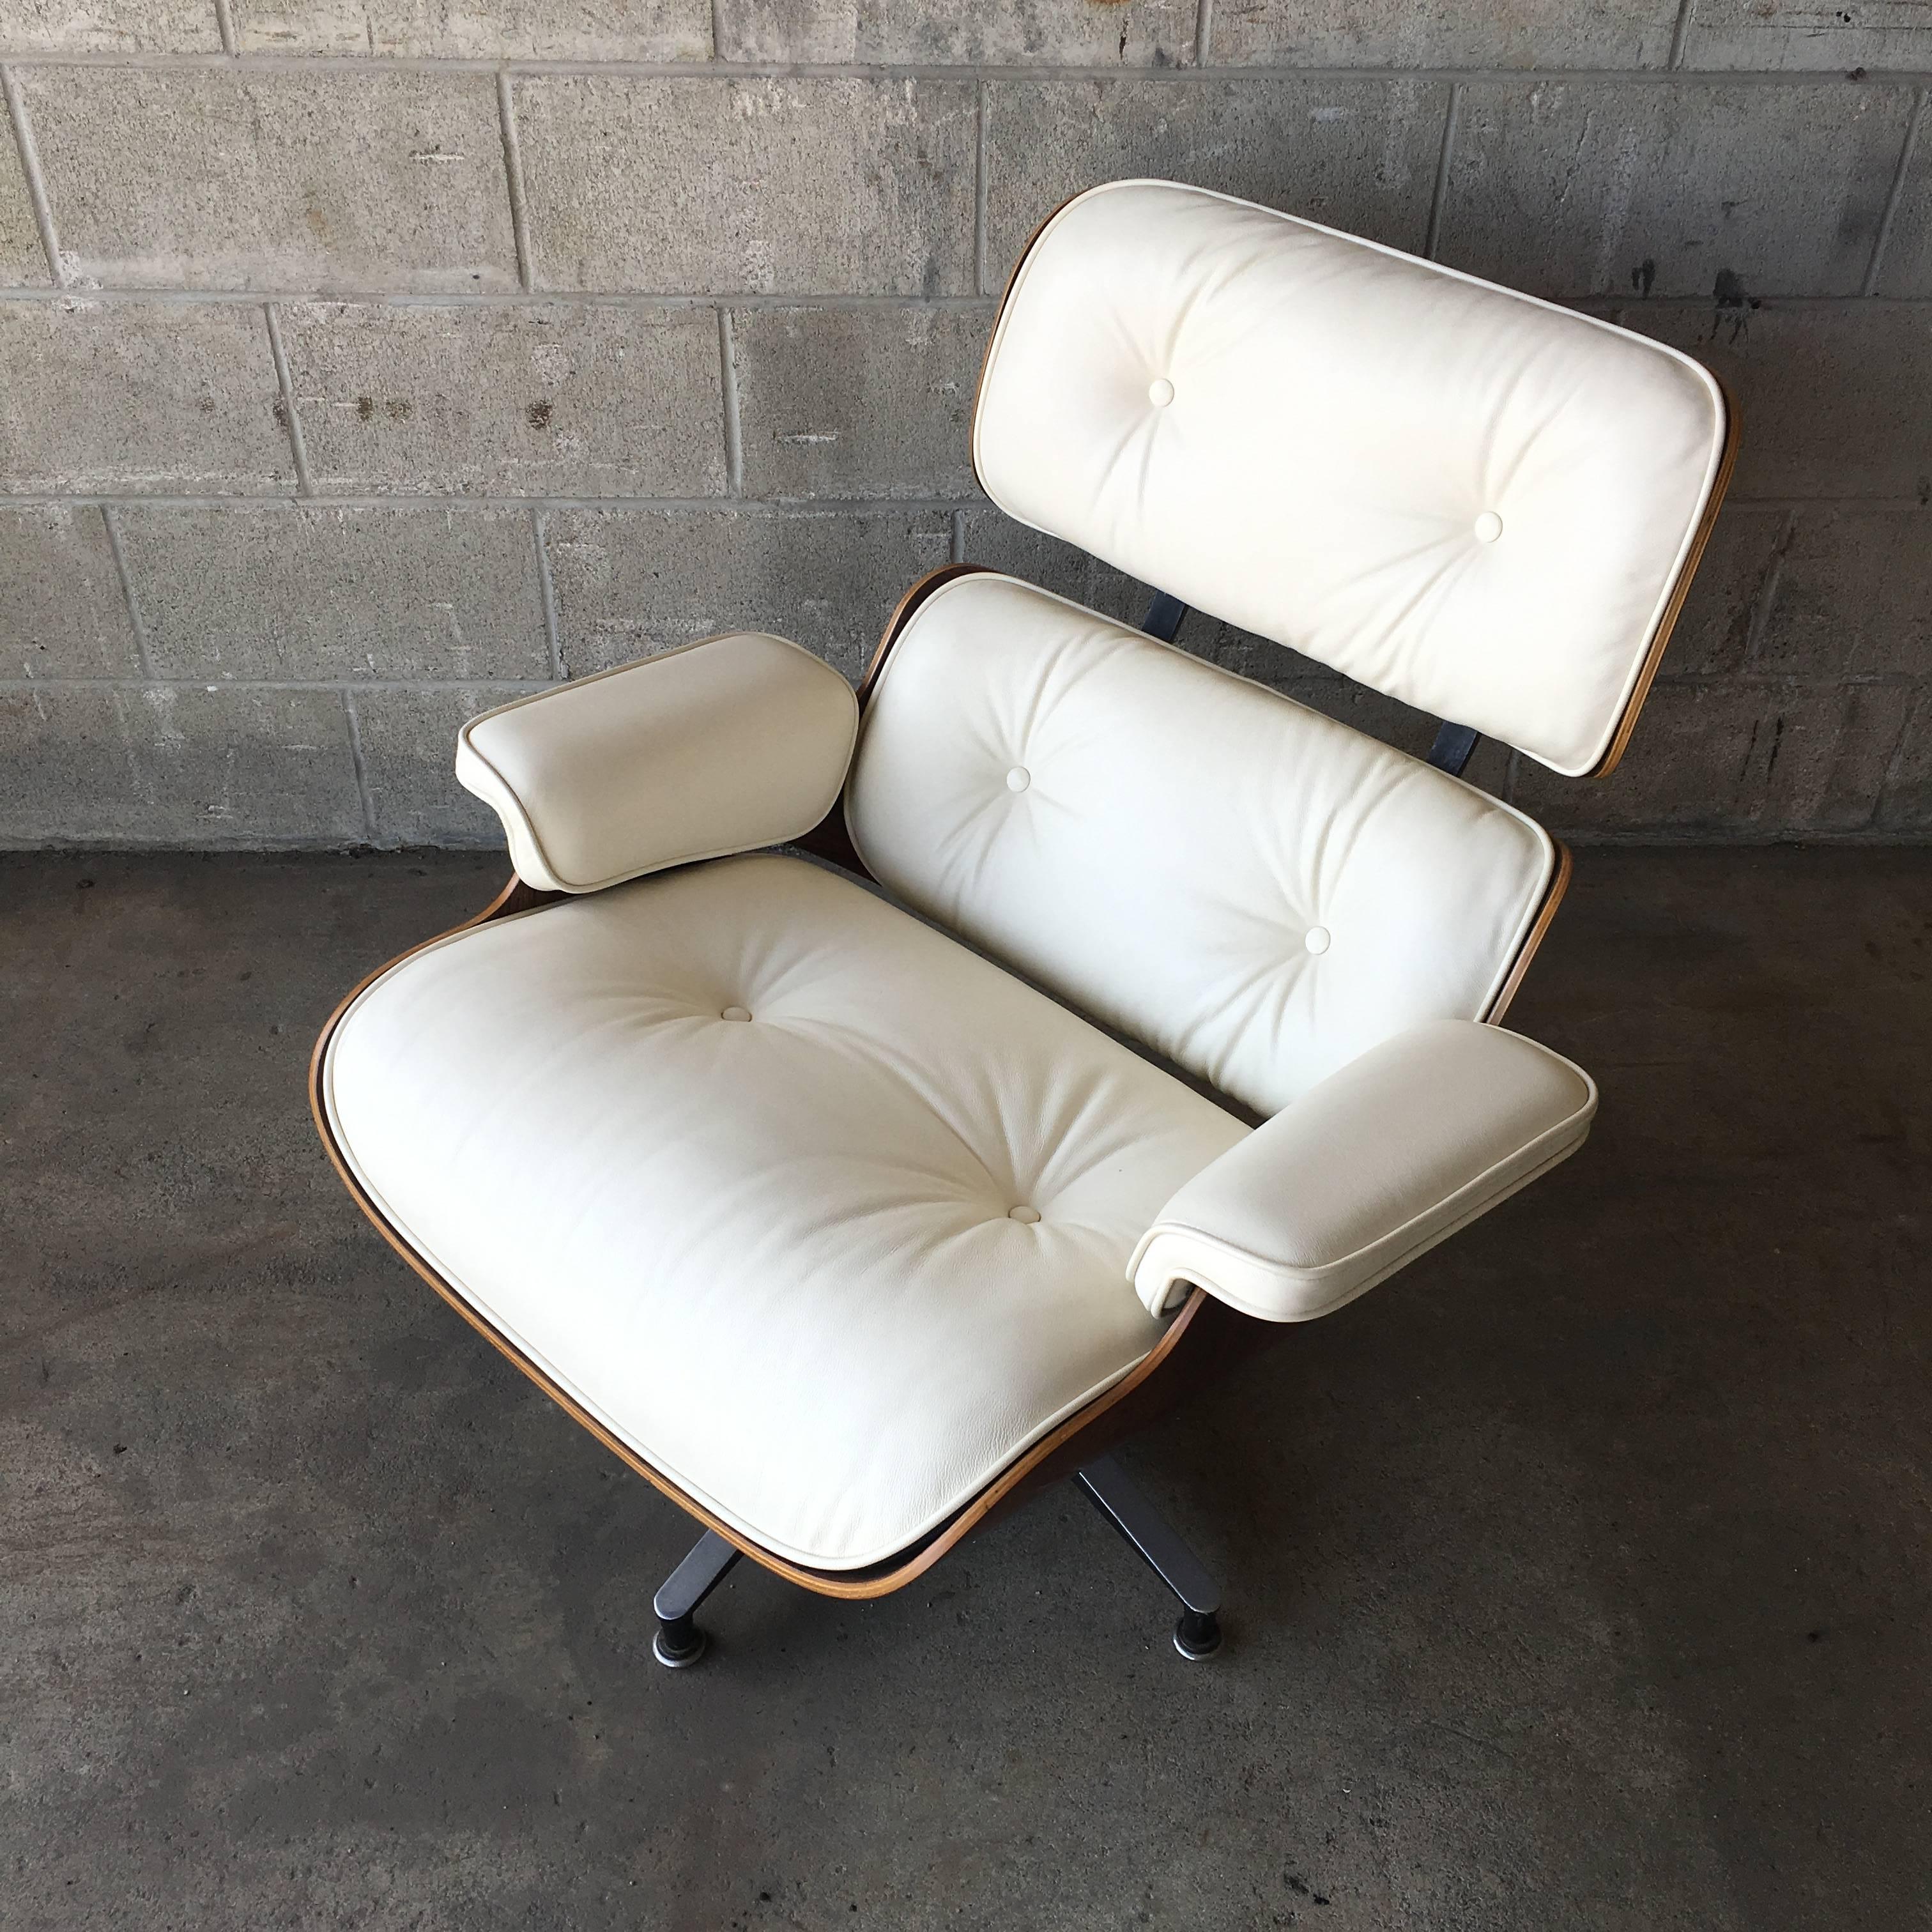 American Herman Miller Eames Lounge Chair with New Ivory Leather